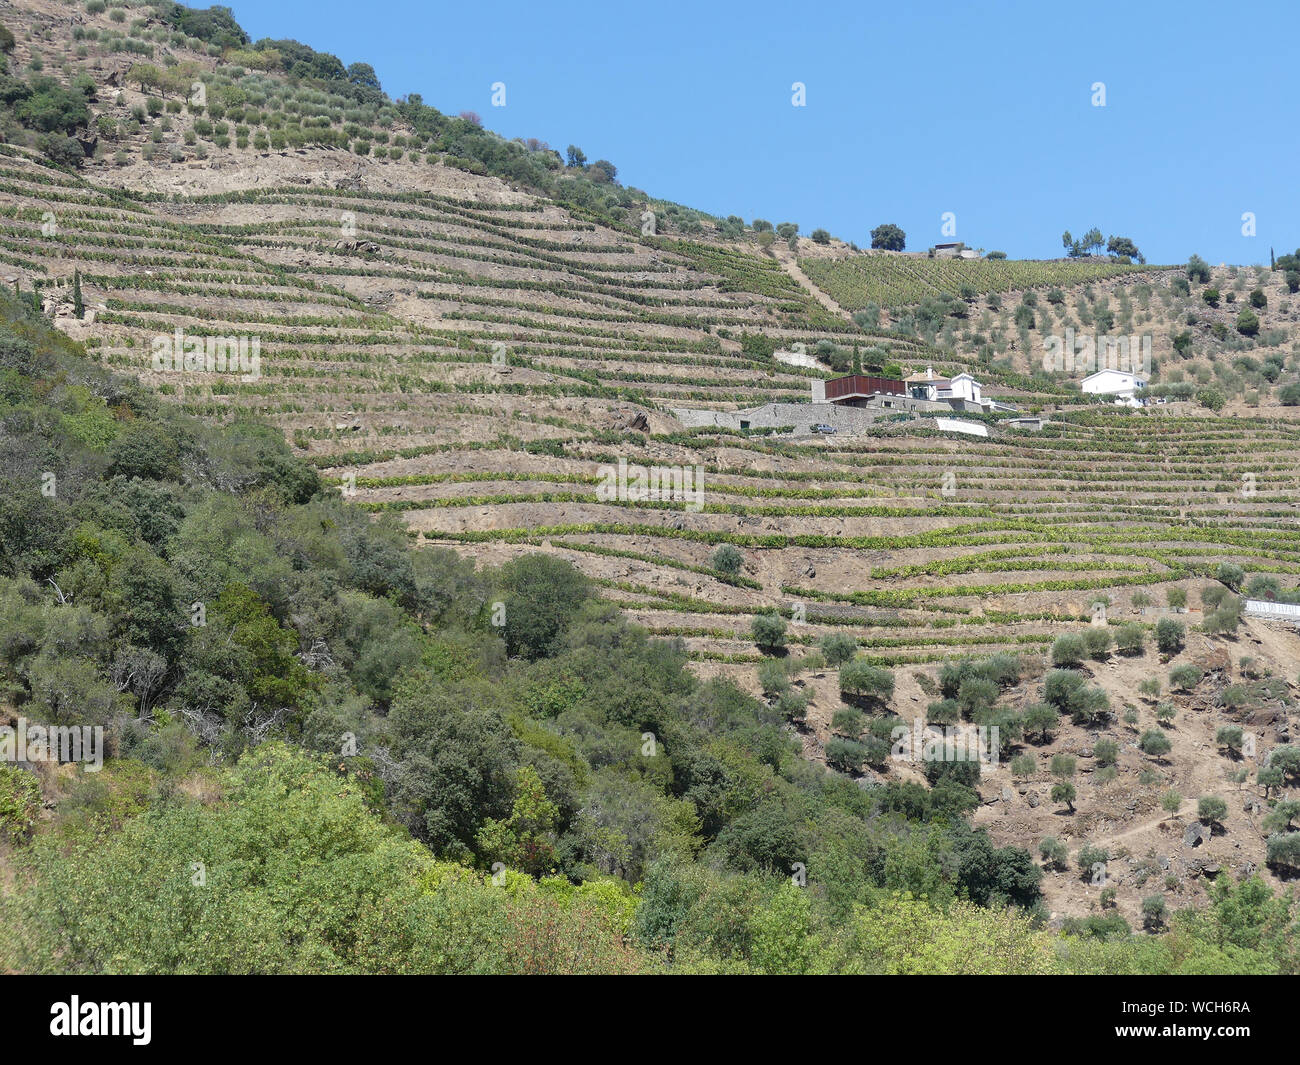 VINYARDS in the Douro River valley in Portugal, with Almond trees on the top and bottom slopes. Photo: Tony Gale Stock Photo